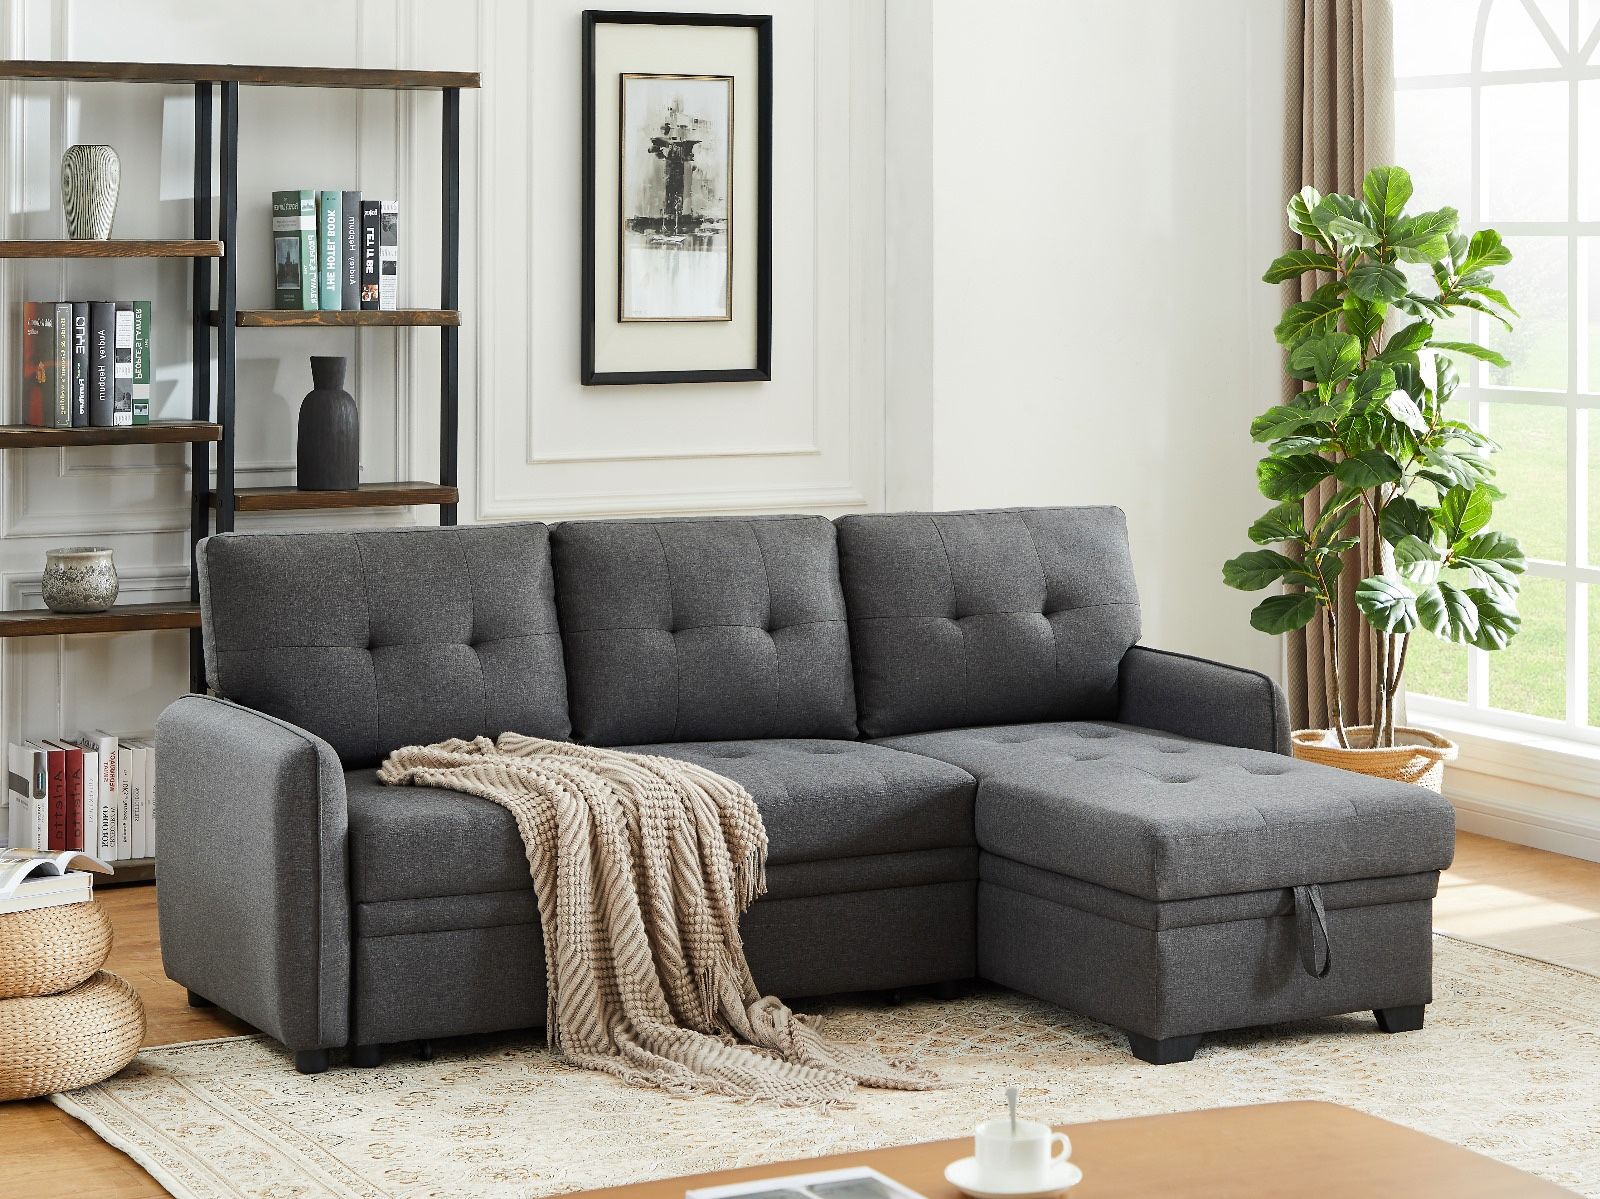 New! Sectional Sofa Bed With Reversible Chaise, Sectional, Sectional Sofa With Pull Out Bed, Sofa Bed, Sleeper Sofa, Sofabed, Couch, Small Sectional